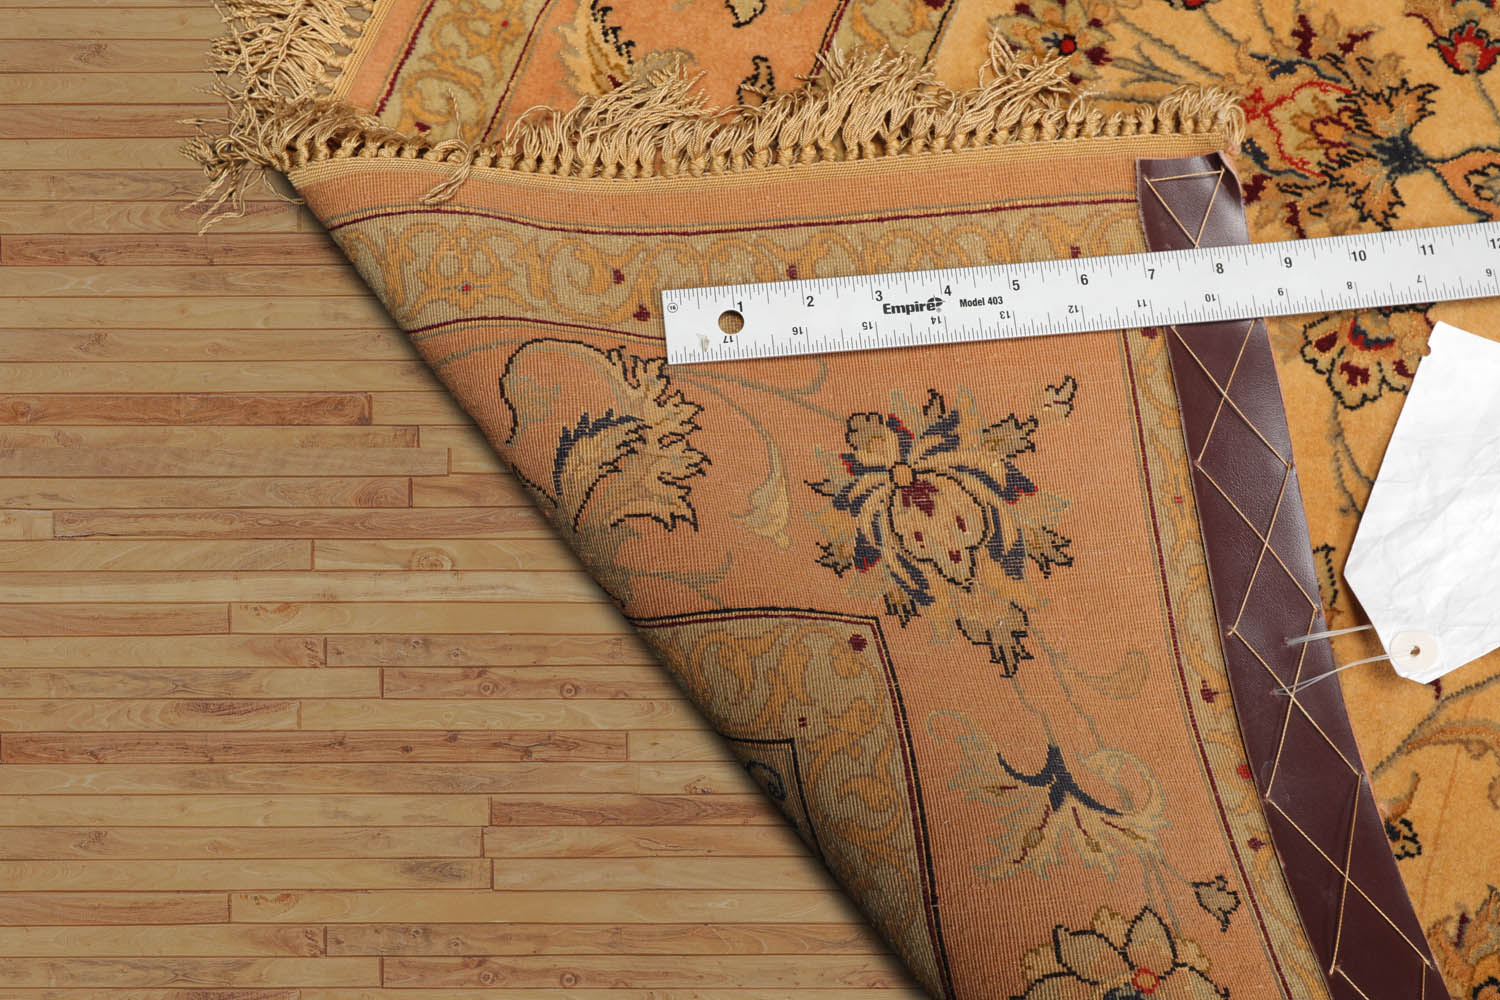 Annunzio 3x5 Hand Knotted 100% Wool Traditional Isfahan with 400 KPSI Oriental Area Rug Gold, Peach Color